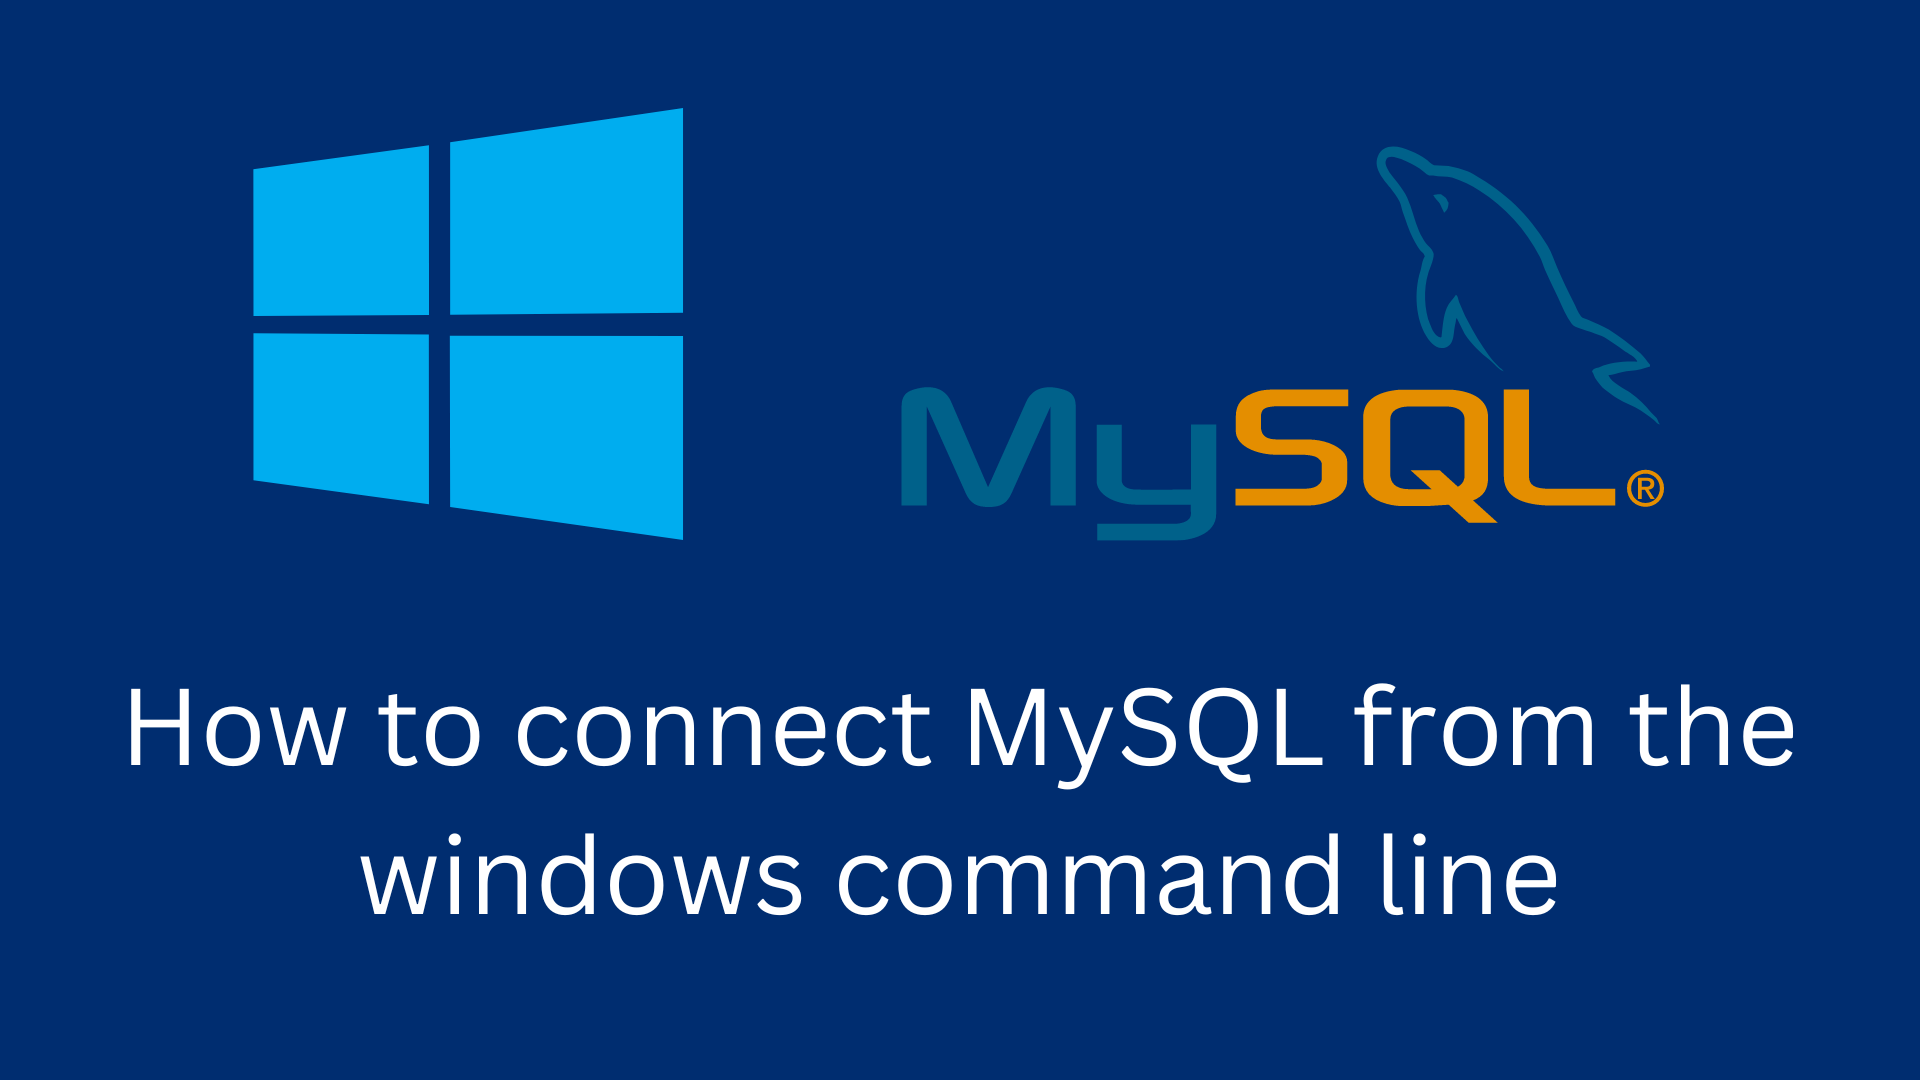 How to connect MySQL from the windows command line